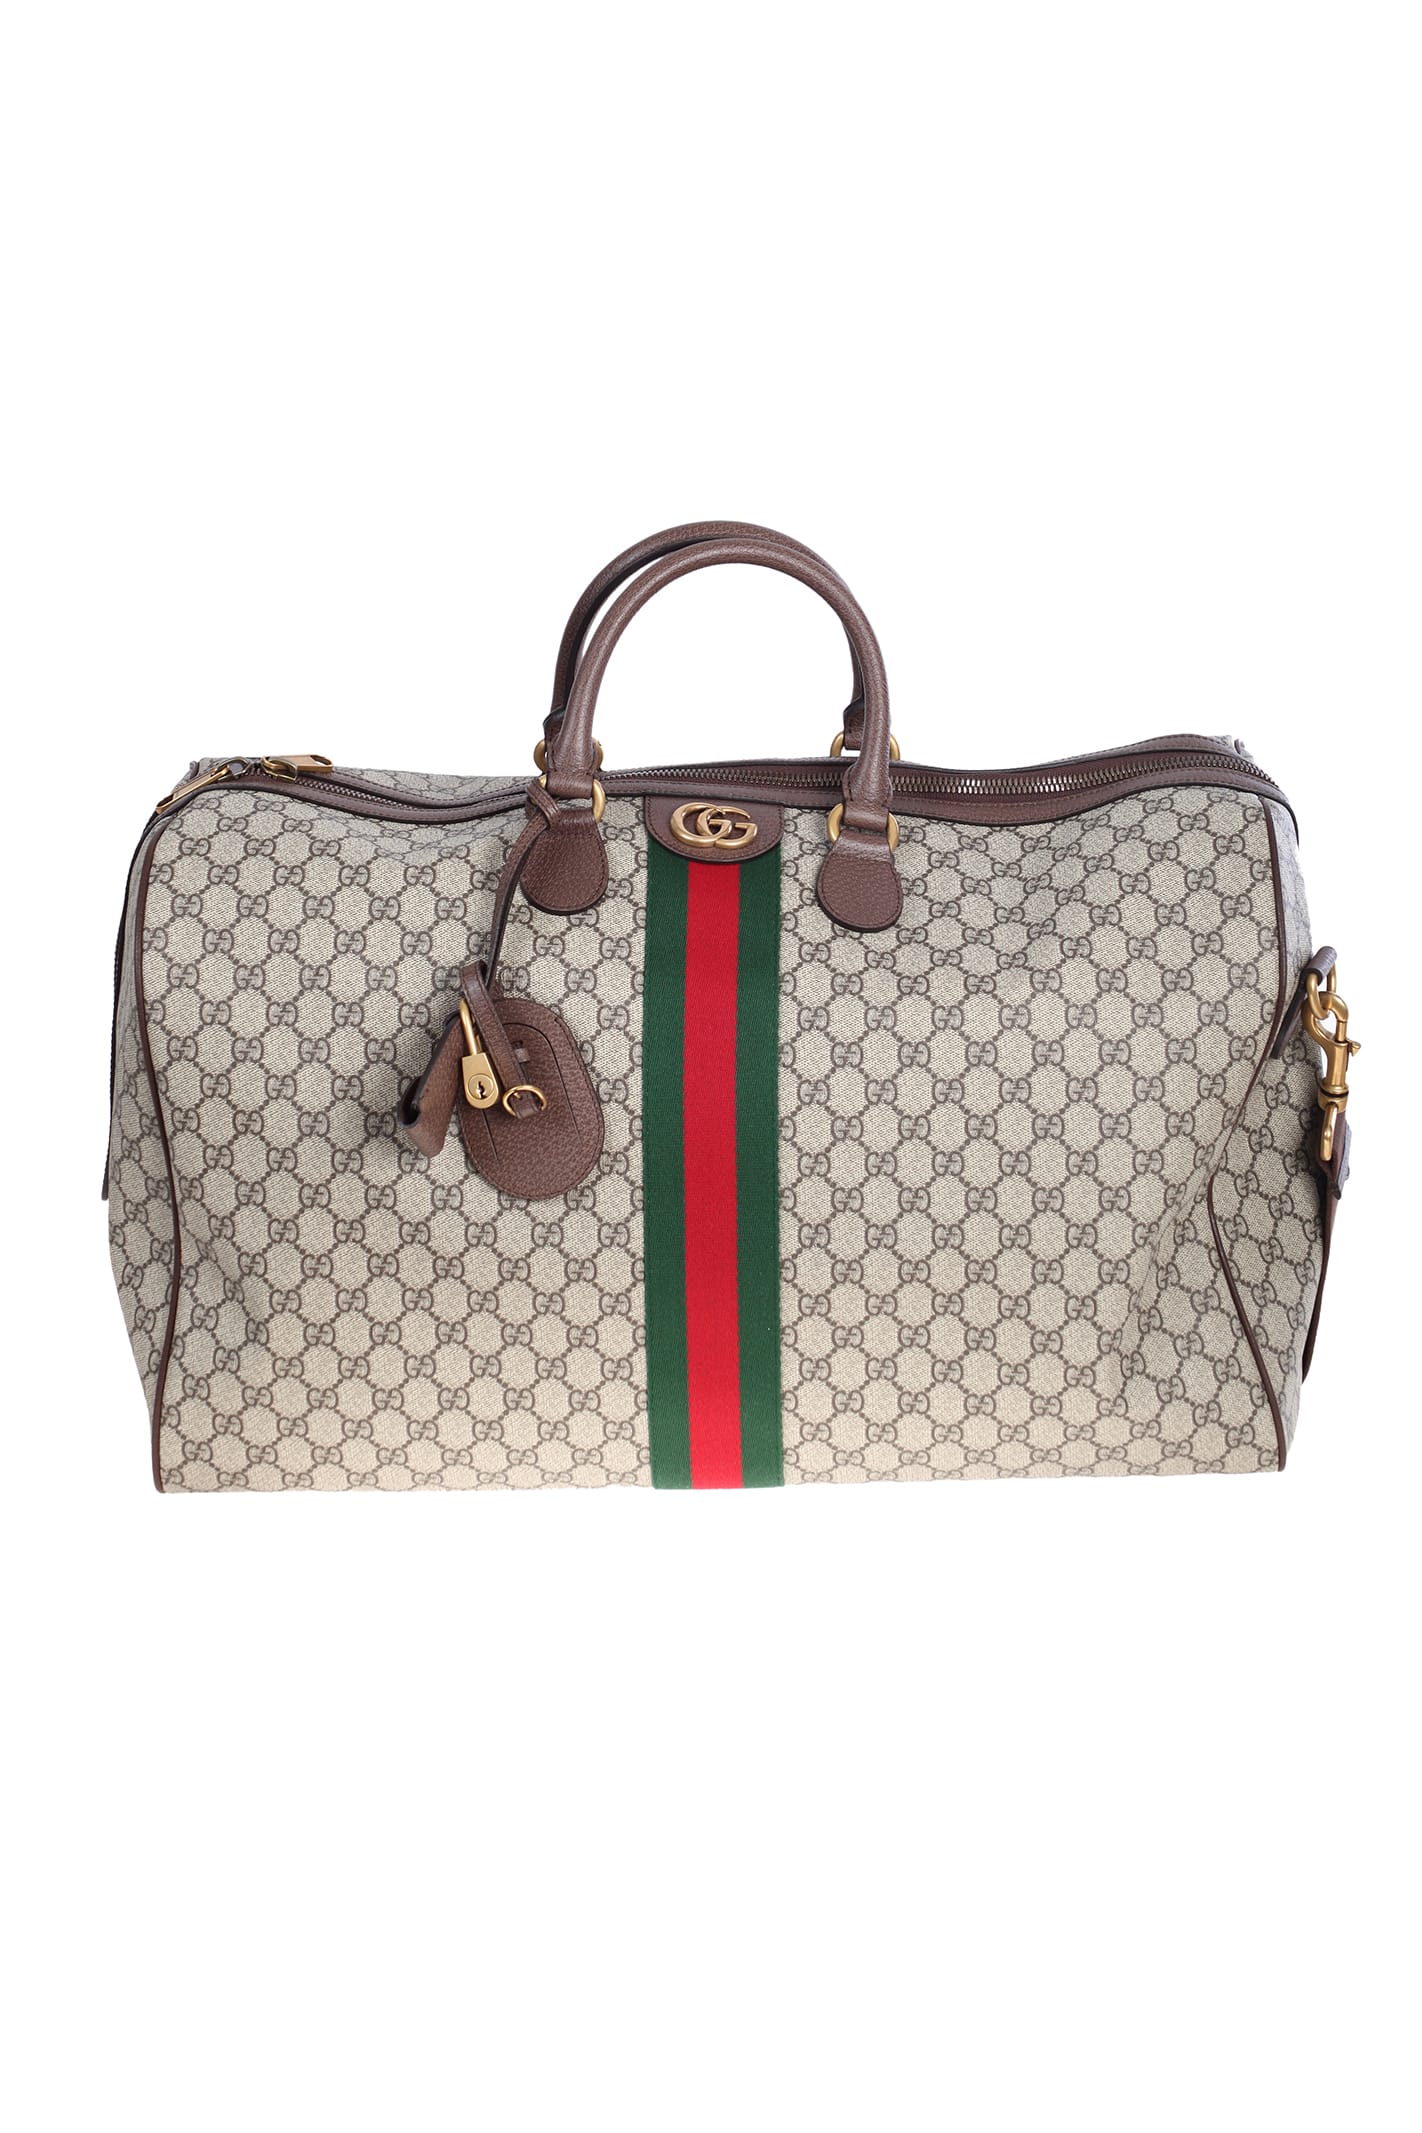 GUCCI OPHIDIA TRAVEL BAG,11285656